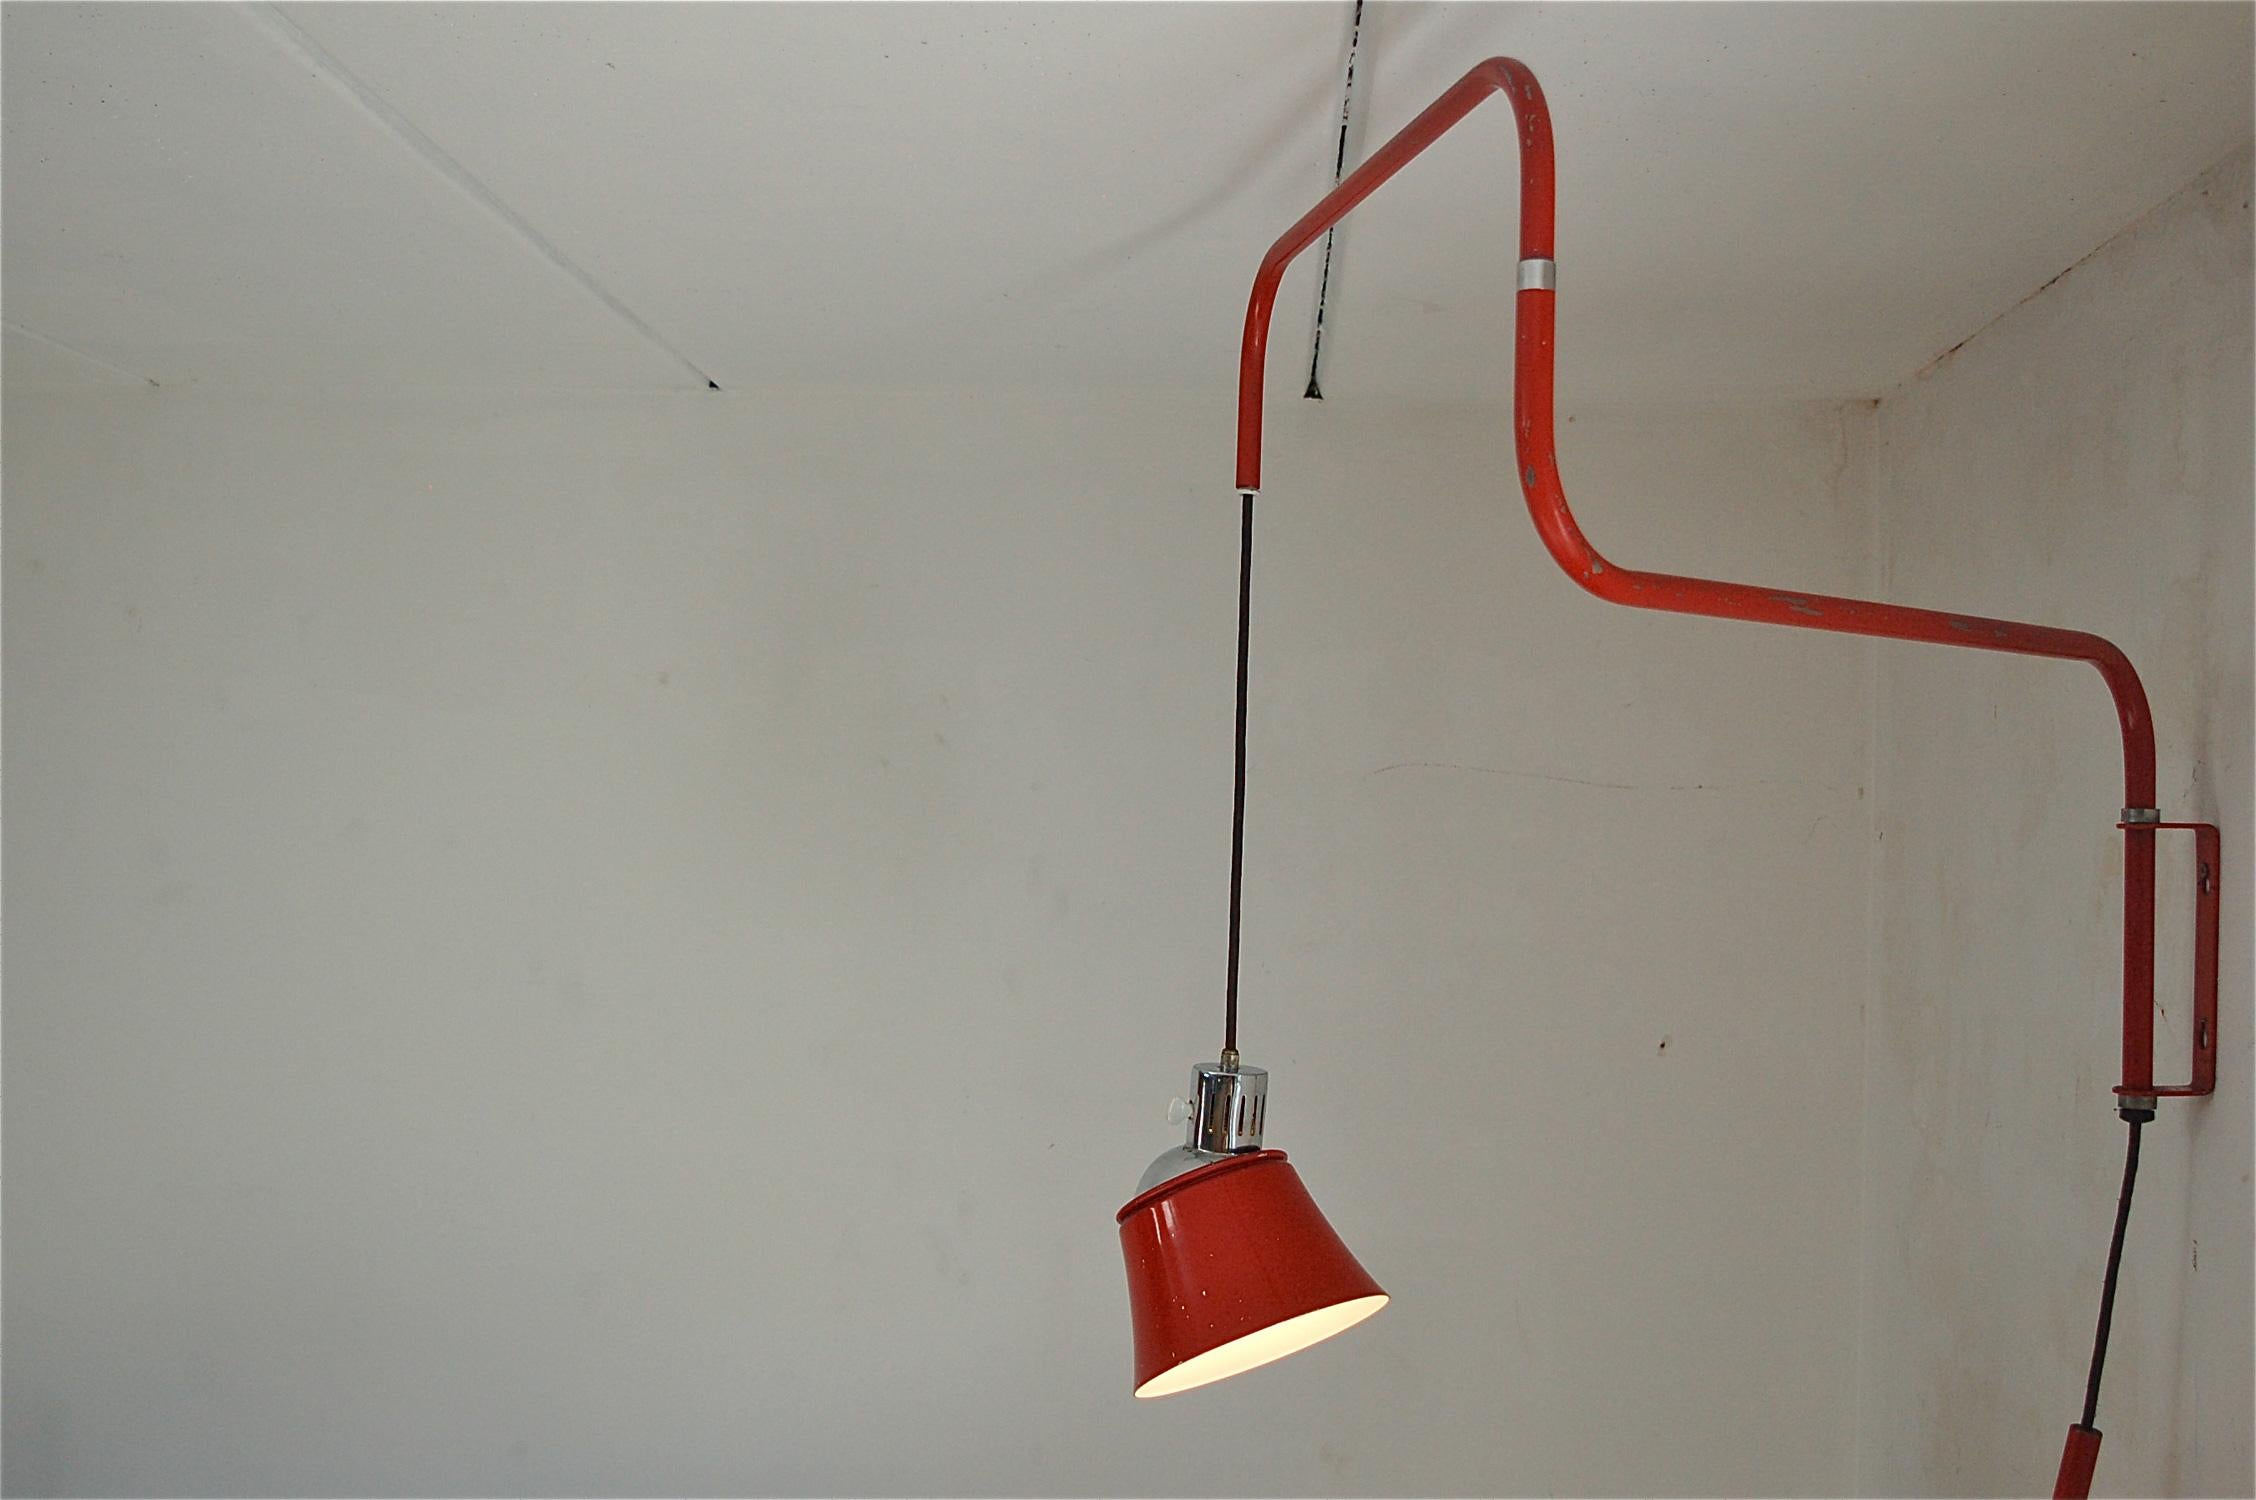 Wall-mounted swing arm wall light designed by Heinrich Siegfried Bormann in 1930. Plugs into the wall and the height of the shade can be adjusted thanks to a counterweight. The shade rests on the chrome lamp fitting. To change the direction of the